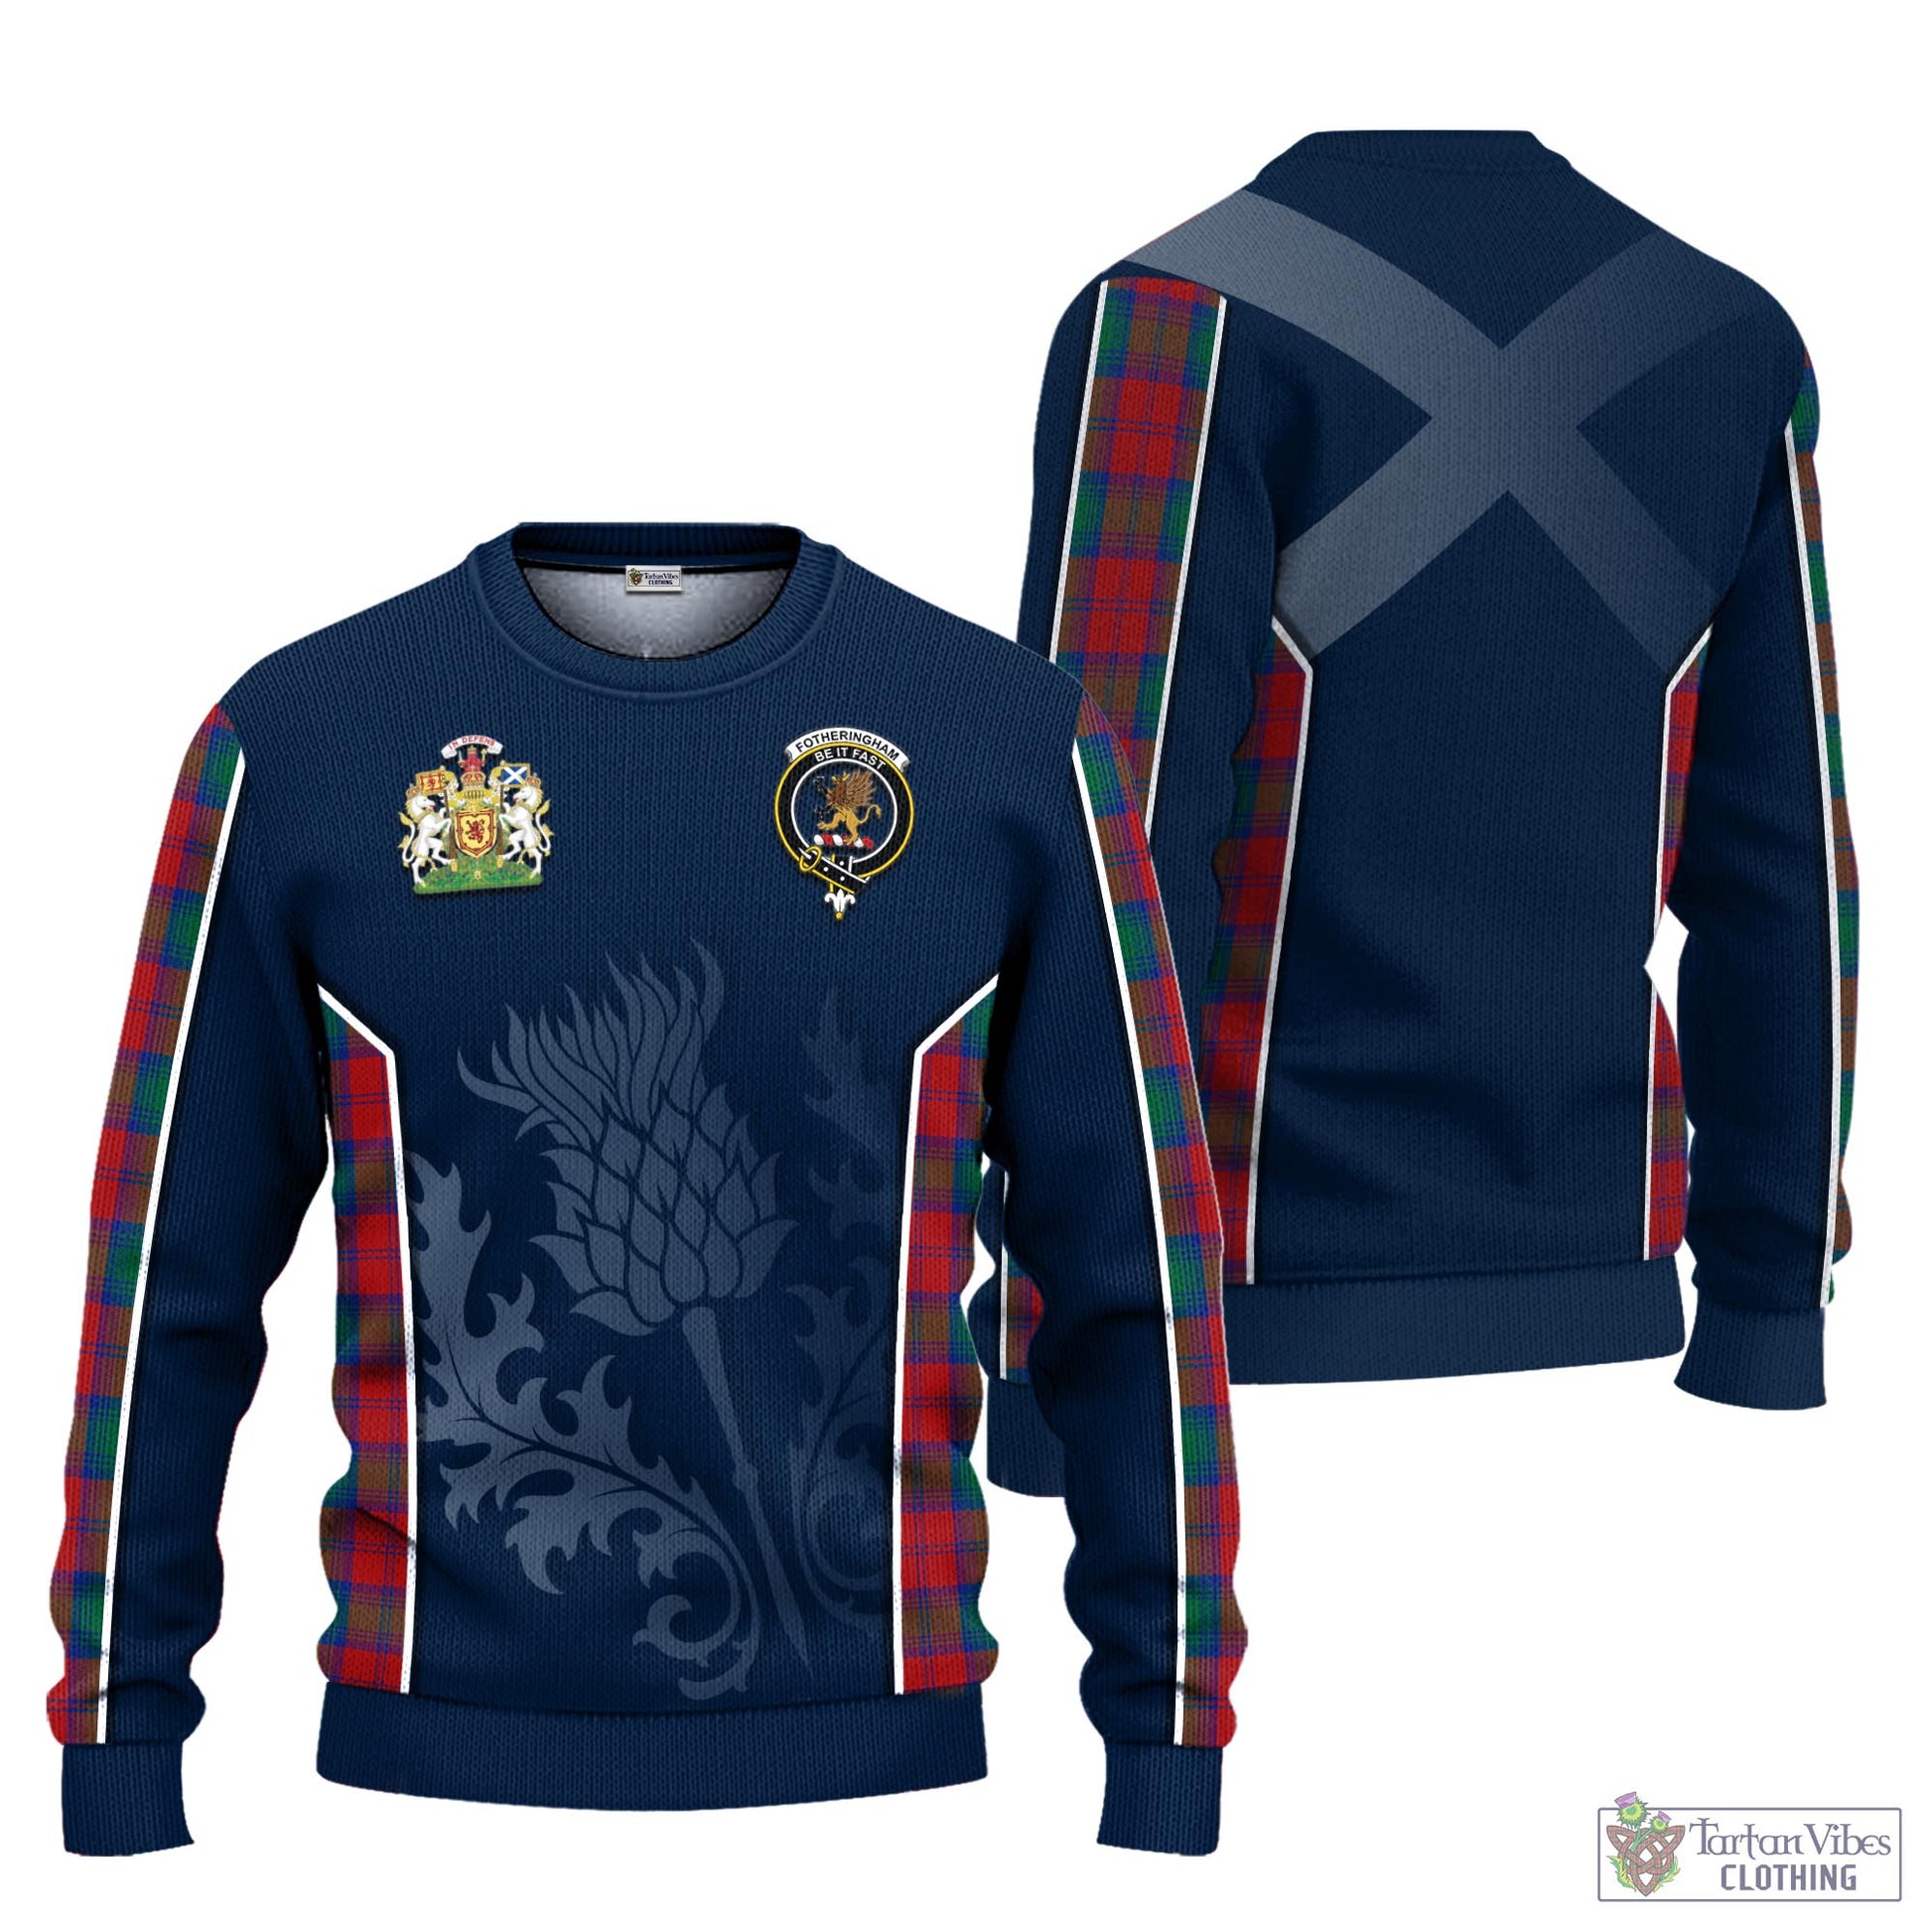 Tartan Vibes Clothing Fotheringham Modern Tartan Knitted Sweatshirt with Family Crest and Scottish Thistle Vibes Sport Style